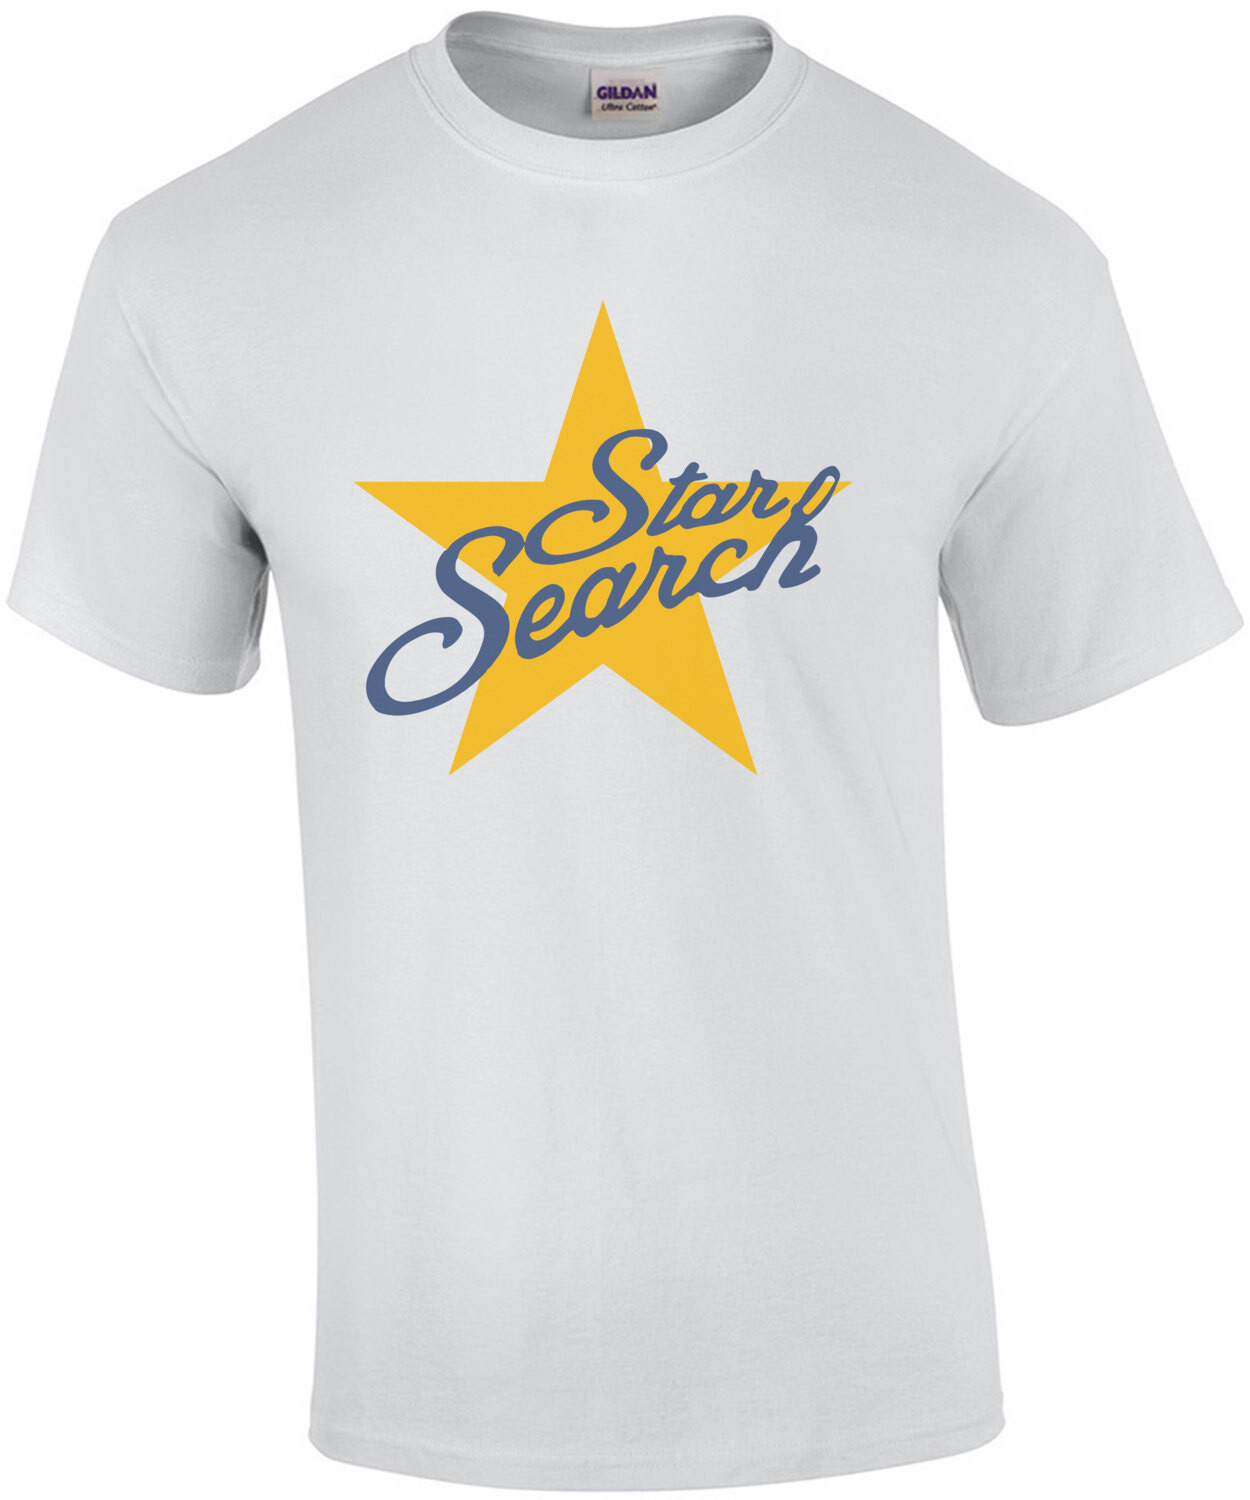 Star Search - 80's T-Shirt